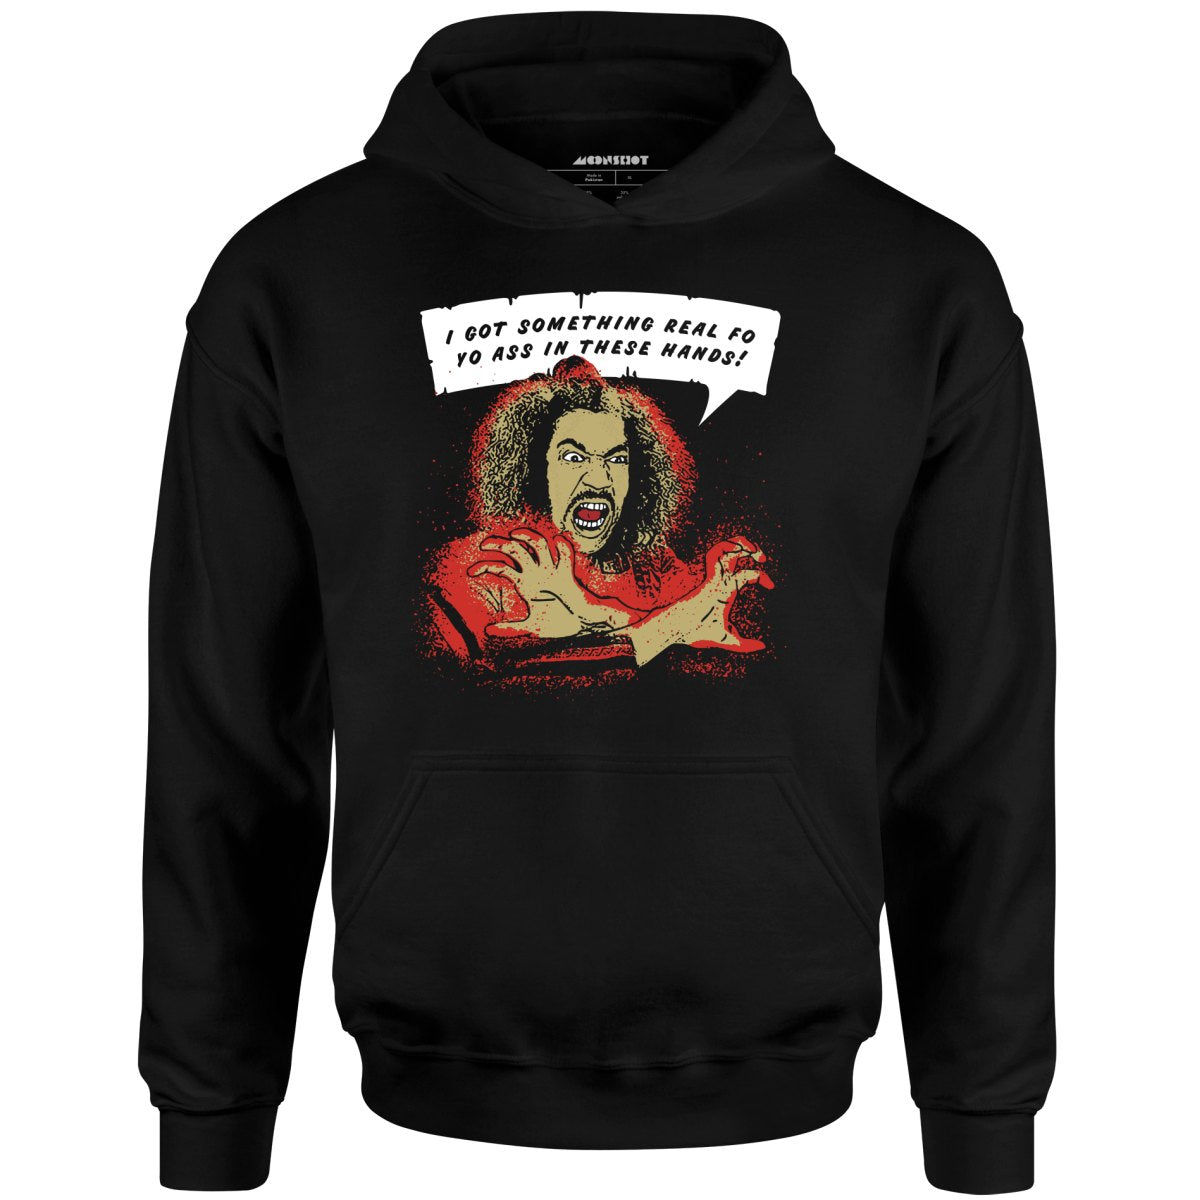 Shonuff - I Got Something Real Fo Yo Ass in These Hands - Unisex Hoodie